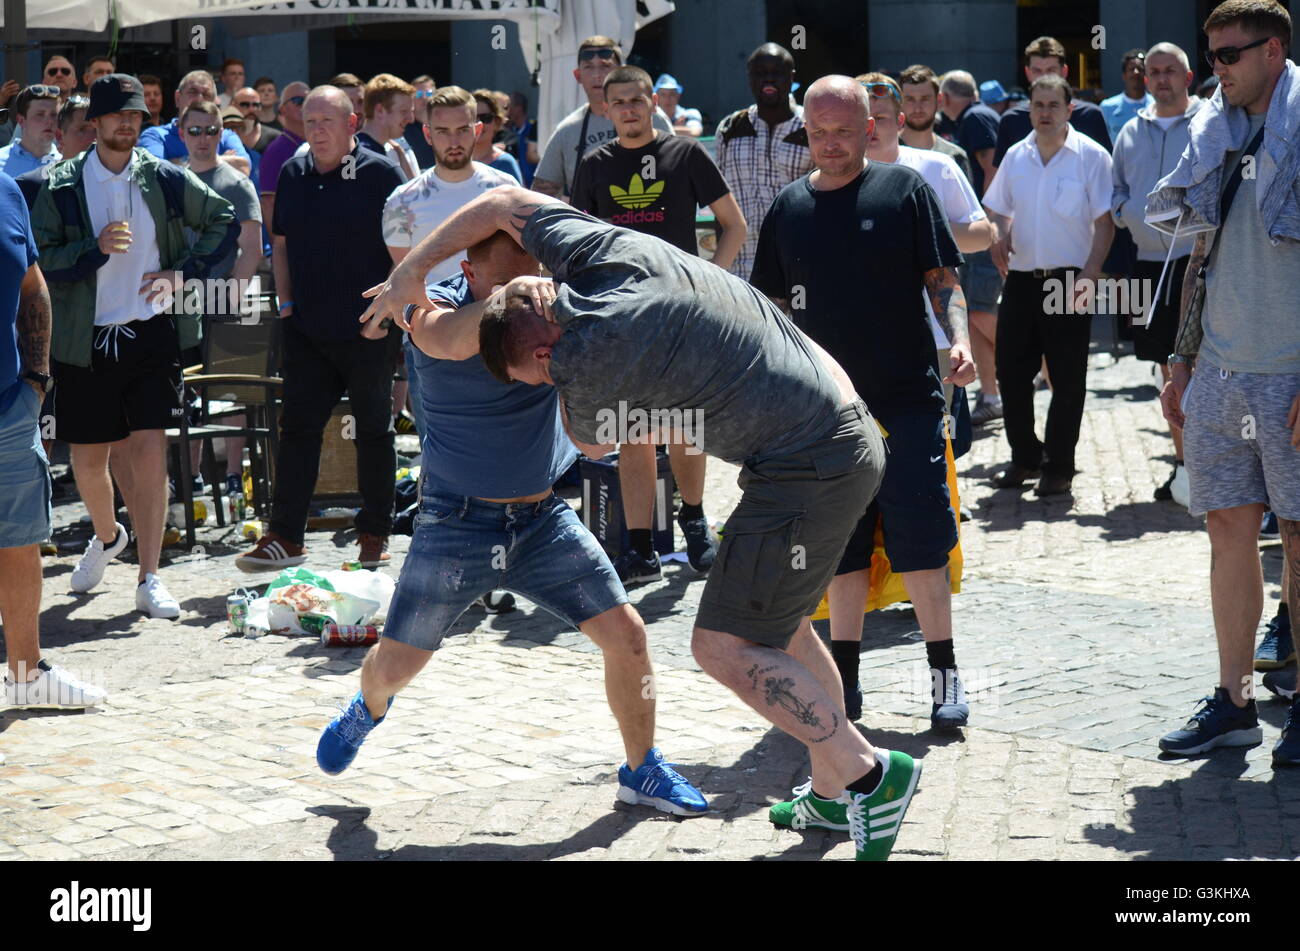 Madrid, Spain. 04th May, 2016. Two Manchester City fans pictured hitting each other in Madrid. Nearly 10,000 Manchester City fans travel to Madrid to watch the semi-final UEFA Champions League match between Real Madrid (Spain) and Manchester City F.C (England). Supporters congregate in the streets around Plaza Mayor in central Madrid prior the game. © Jorge Sanz/Pacific Press/Alamy Live News Stock Photo